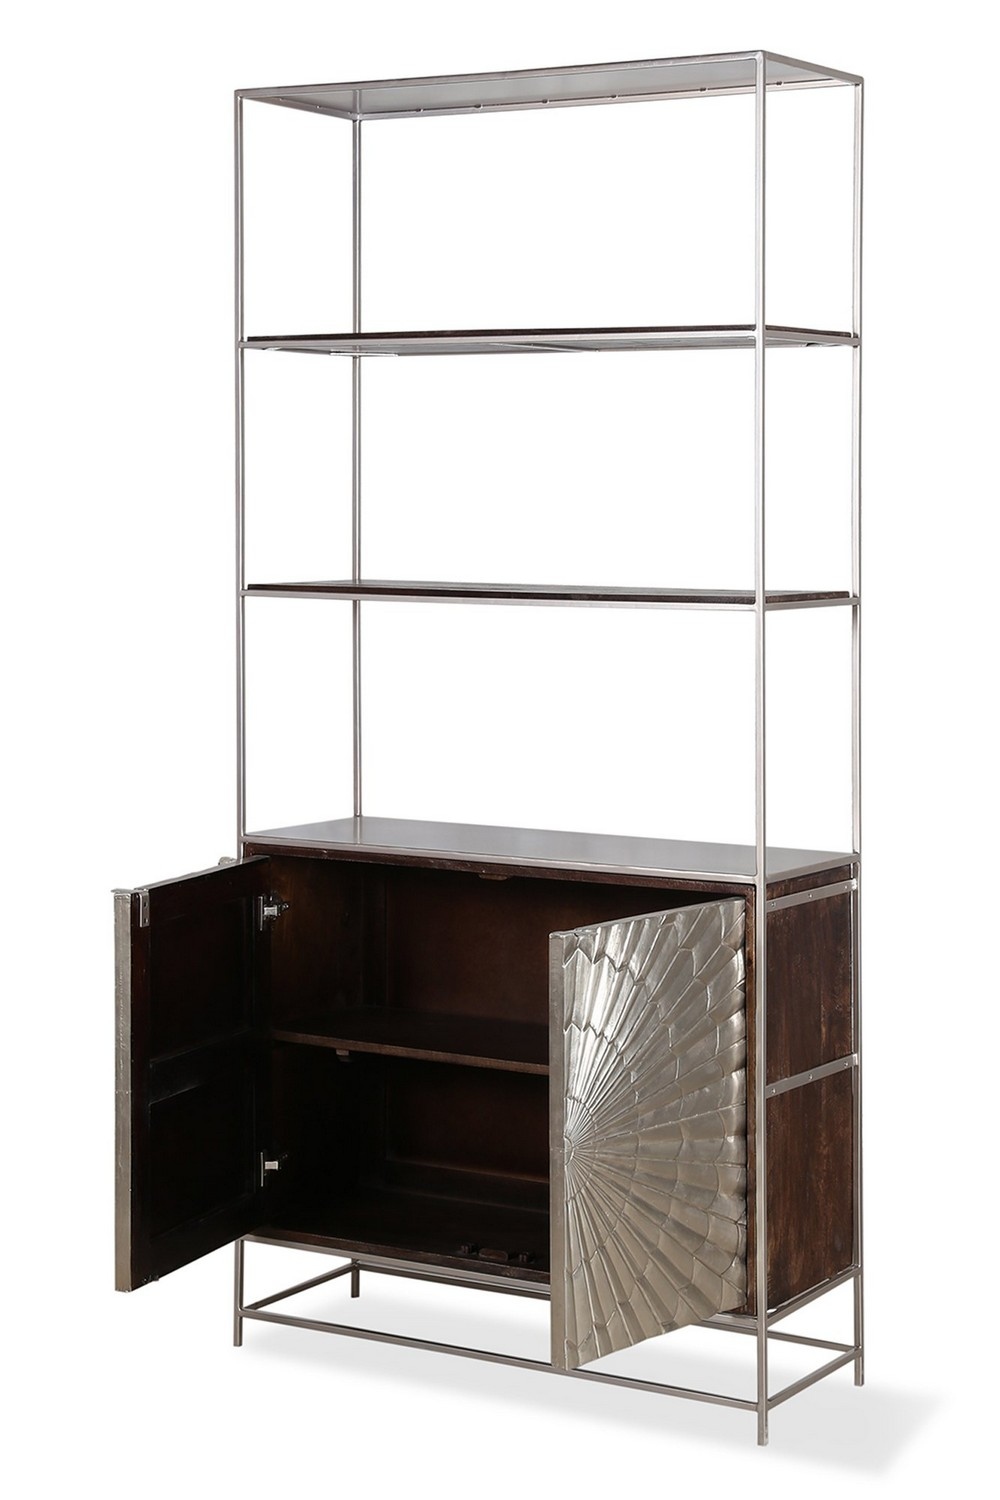 Parker House Crossings Palace Bookcase - Sliver Clad